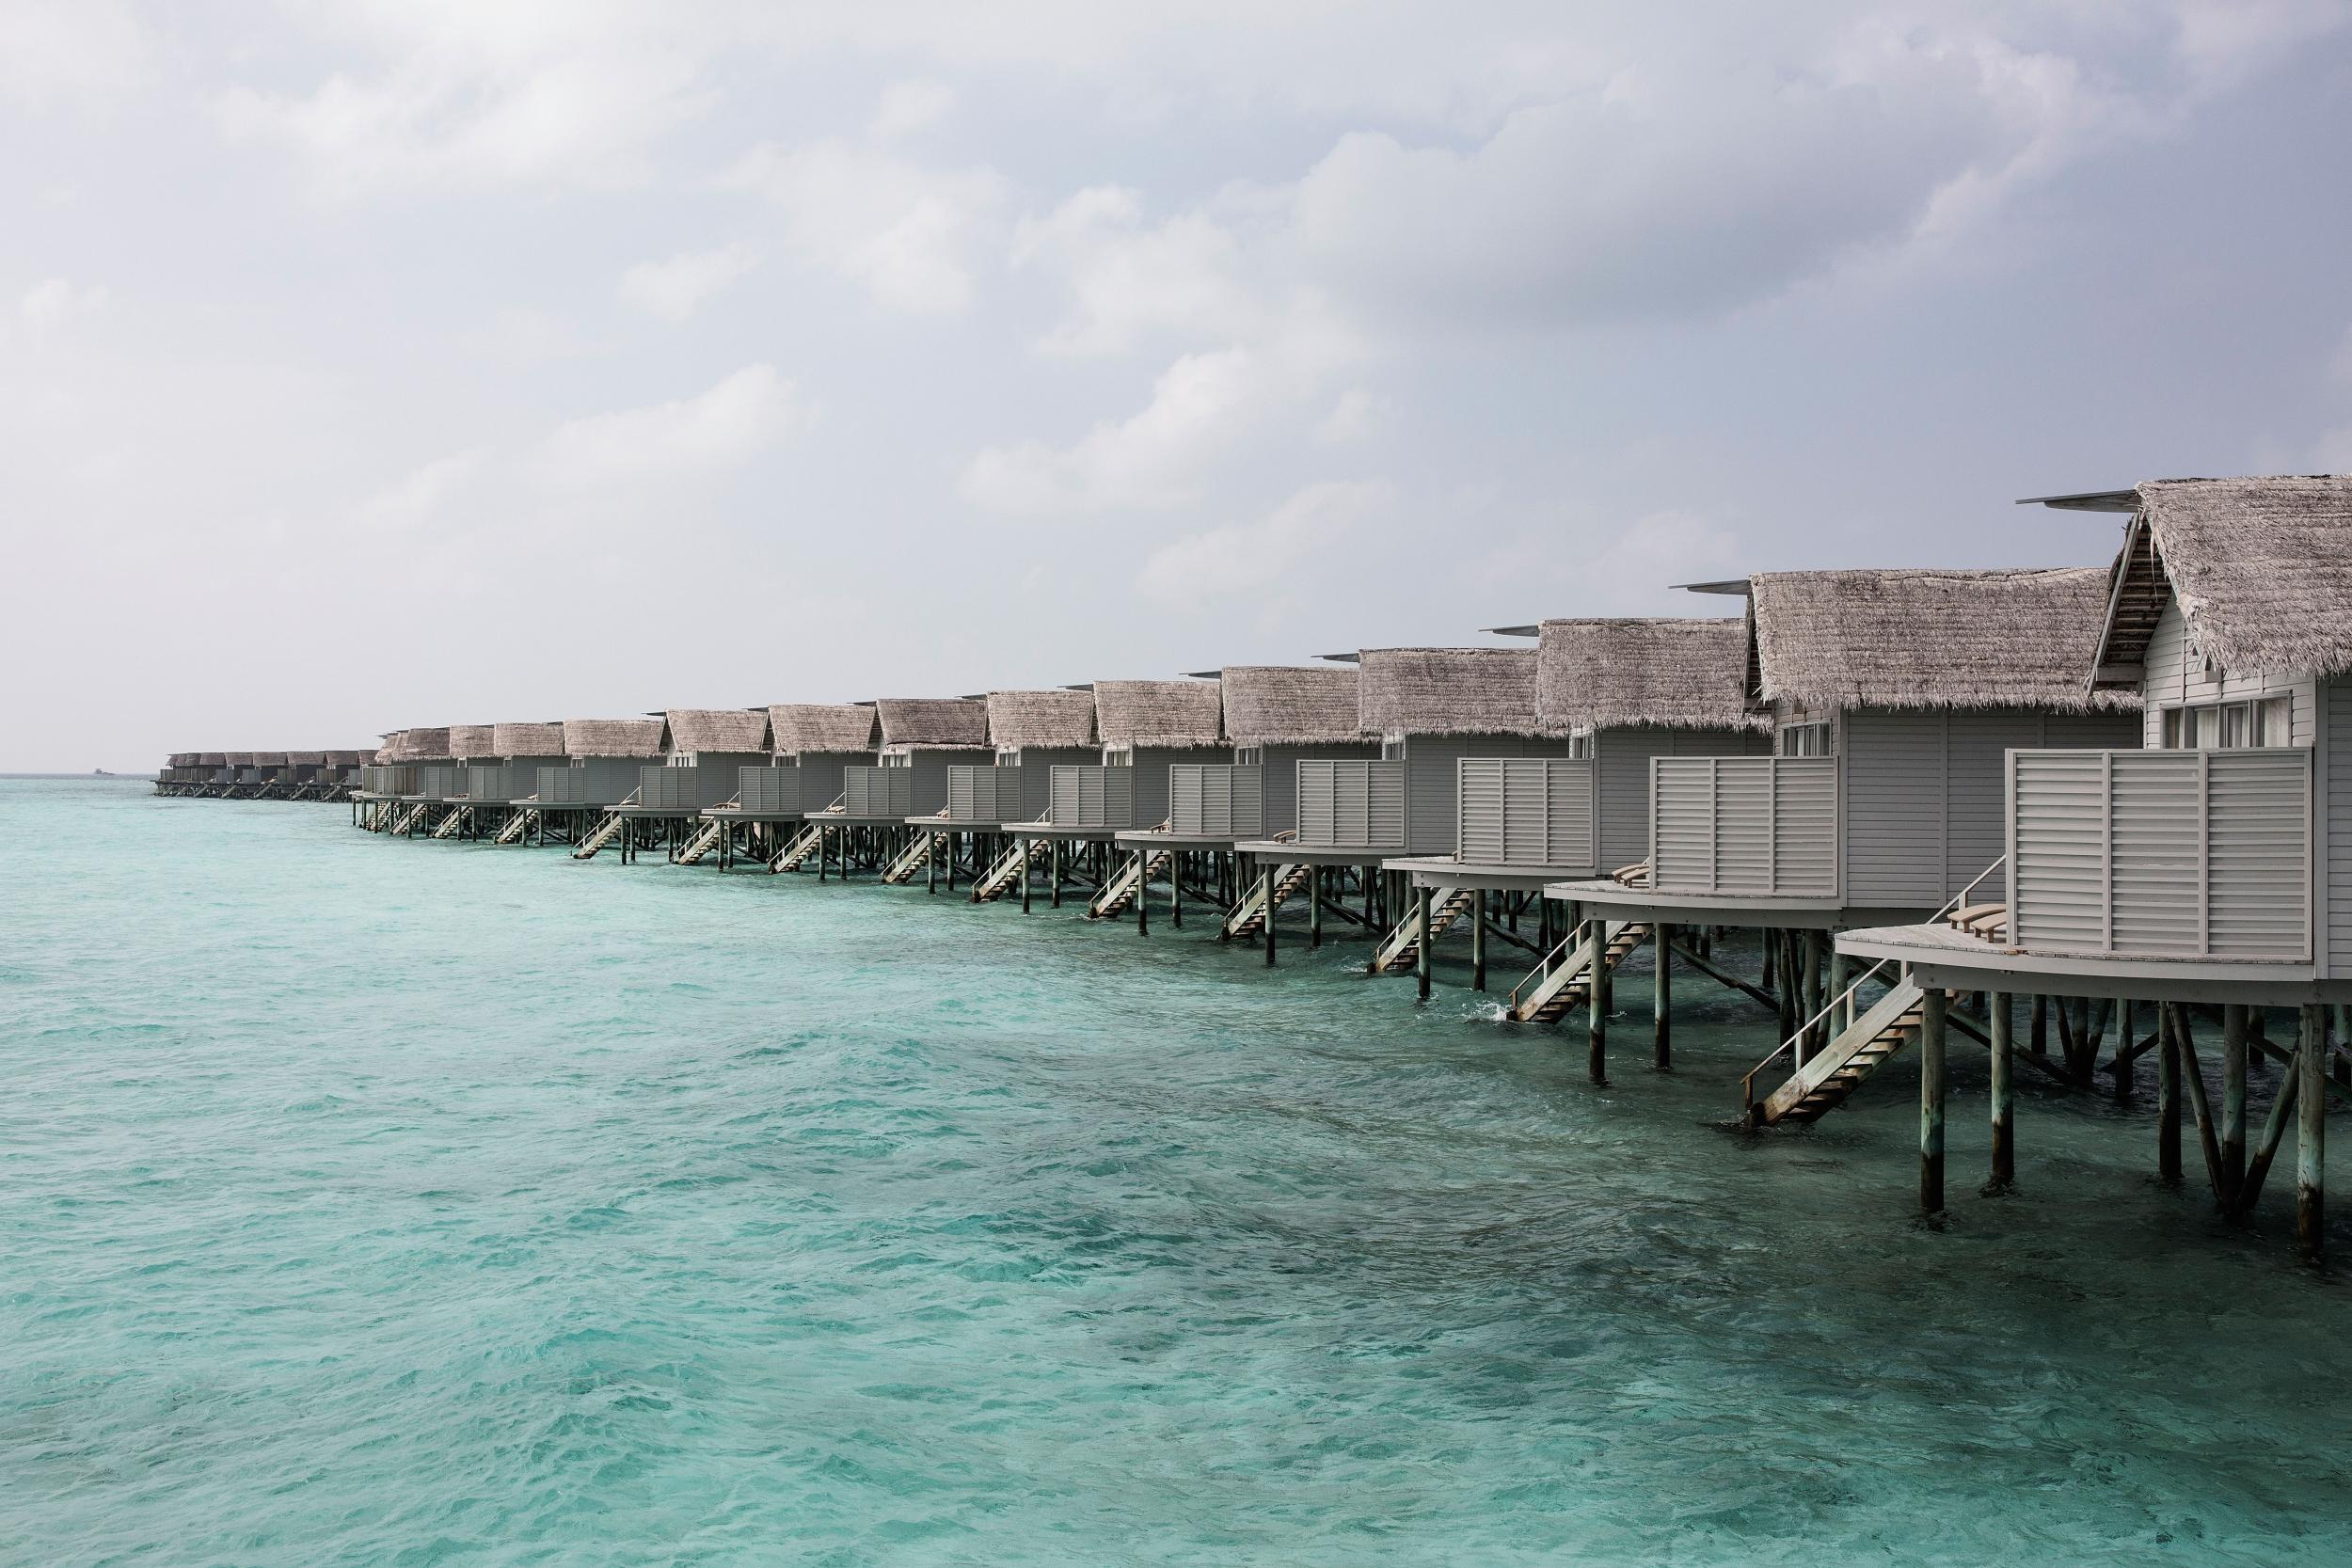 The Maldives: not for those who like exploring